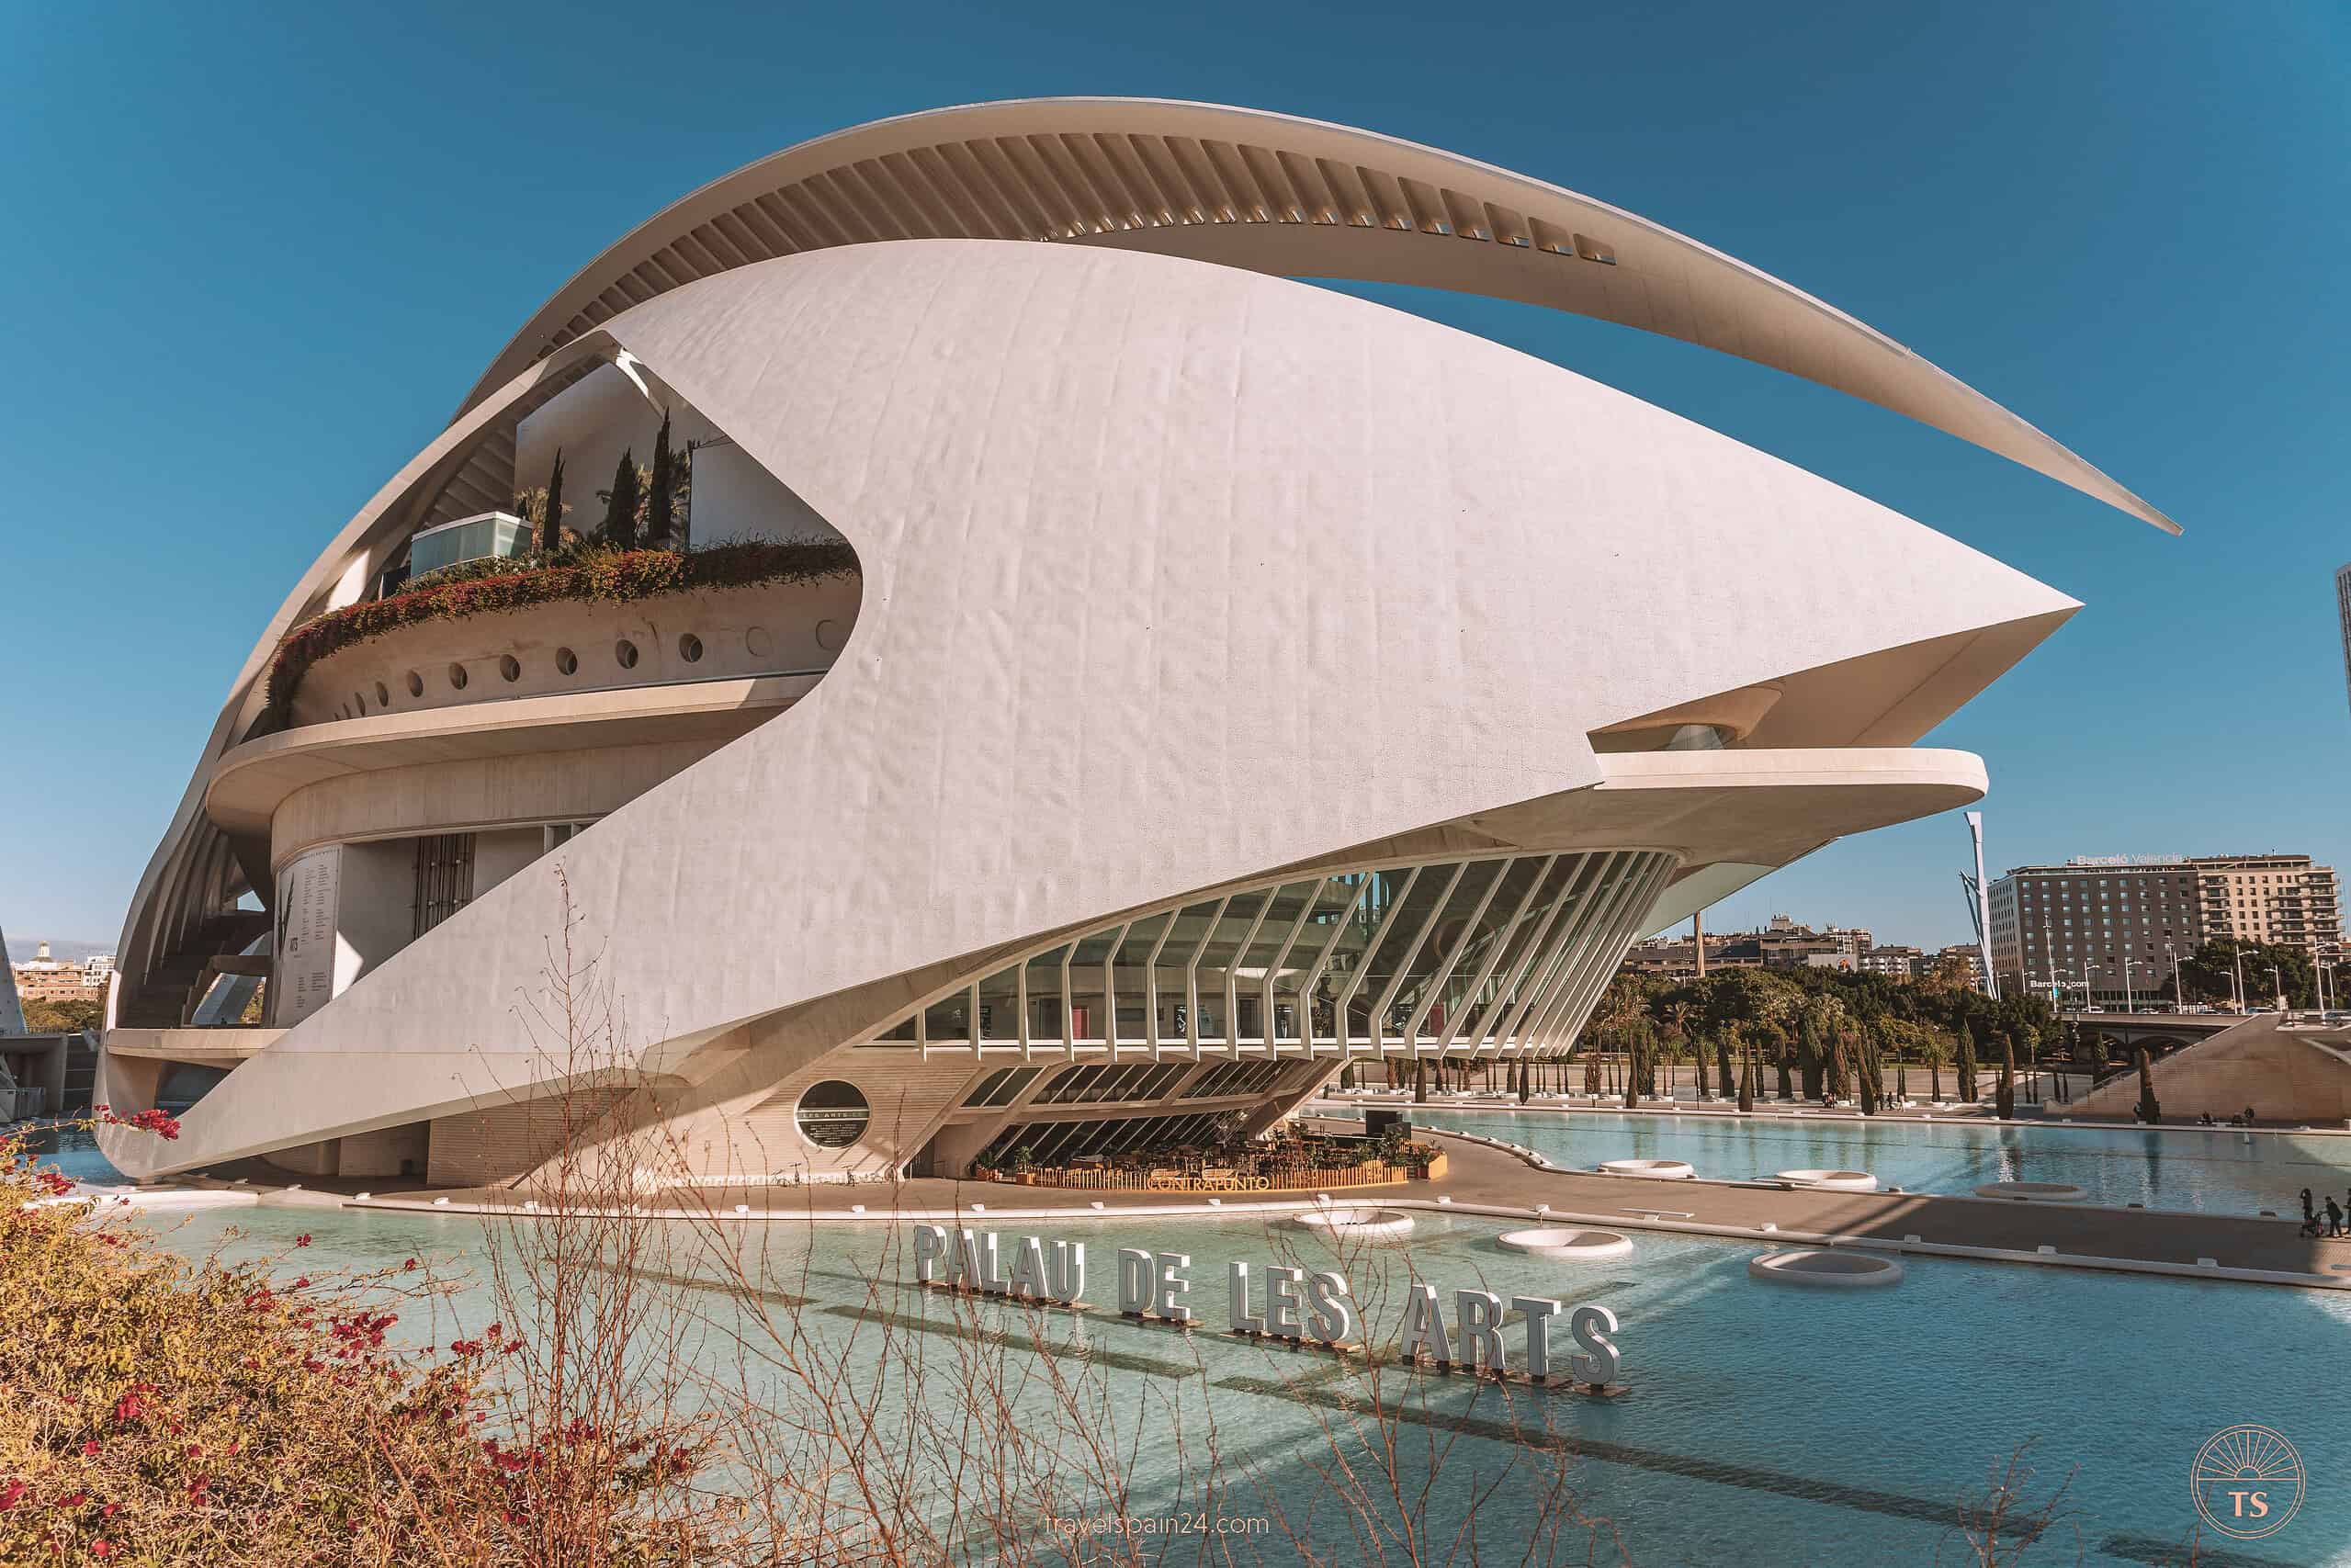 The striking architecture of Palau de les Arts, part of the City of Arts and Sciences in Valencia, serving as an IMAX theater and opera house, underlining its status as a must-see for visitors.